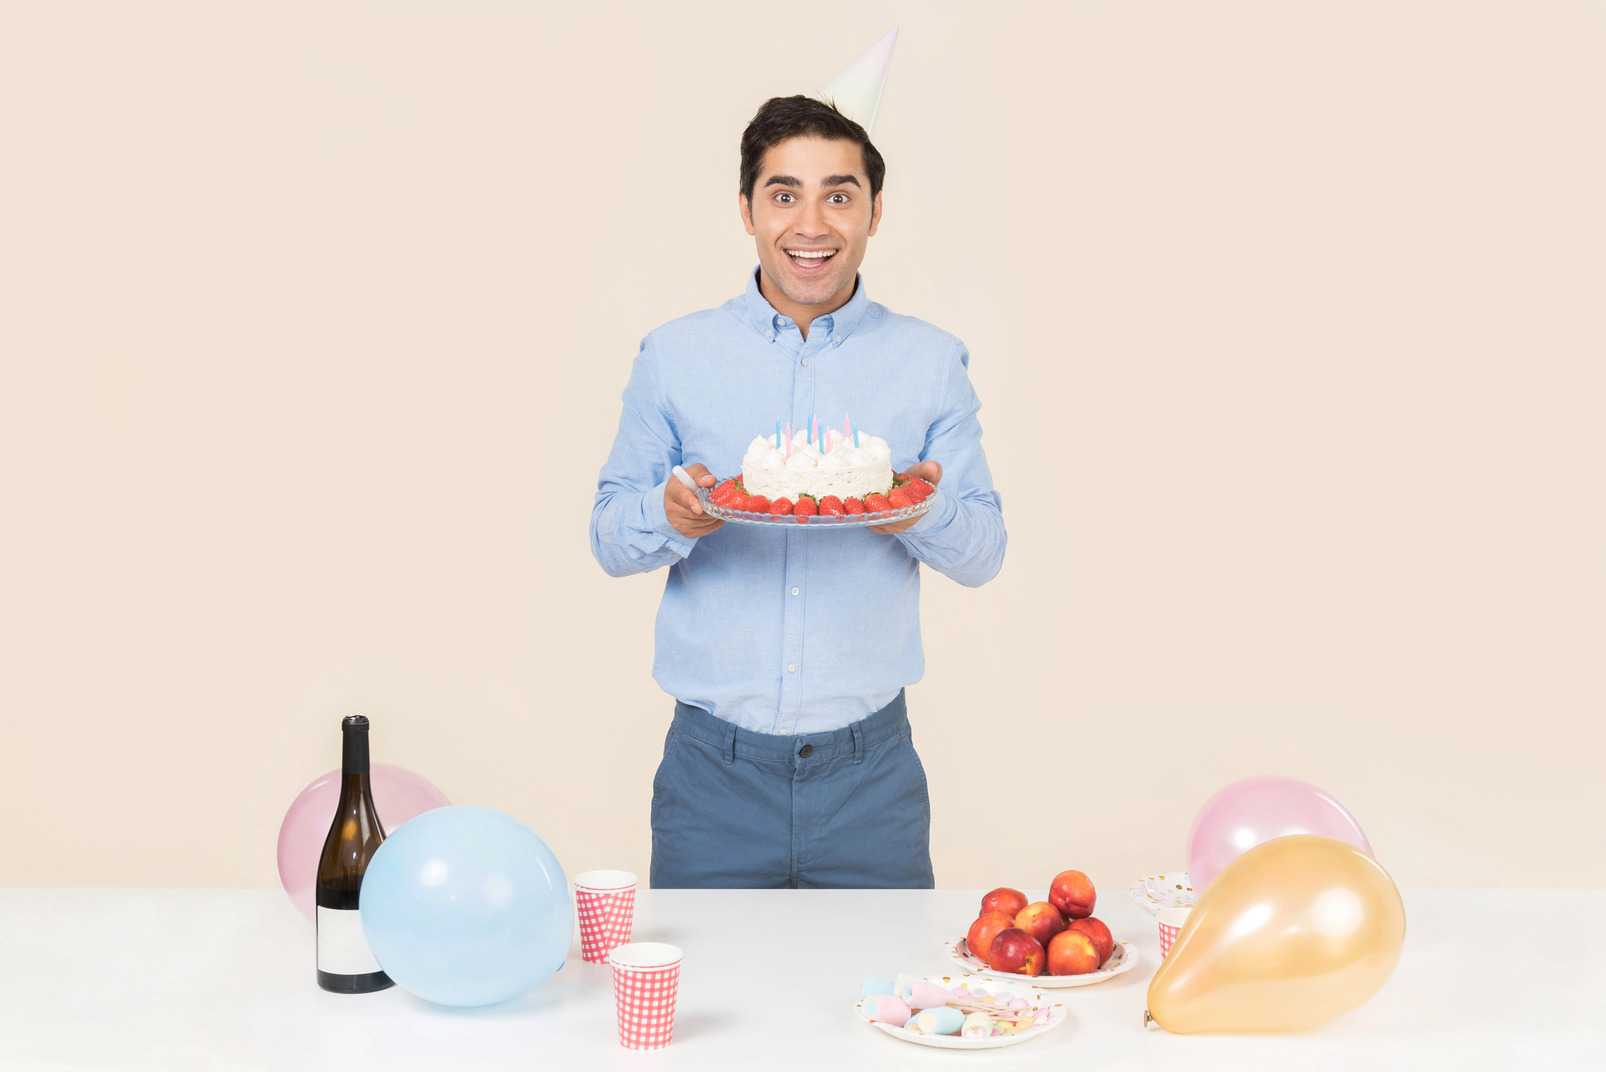 Young man standing at the birthday table and holding cake